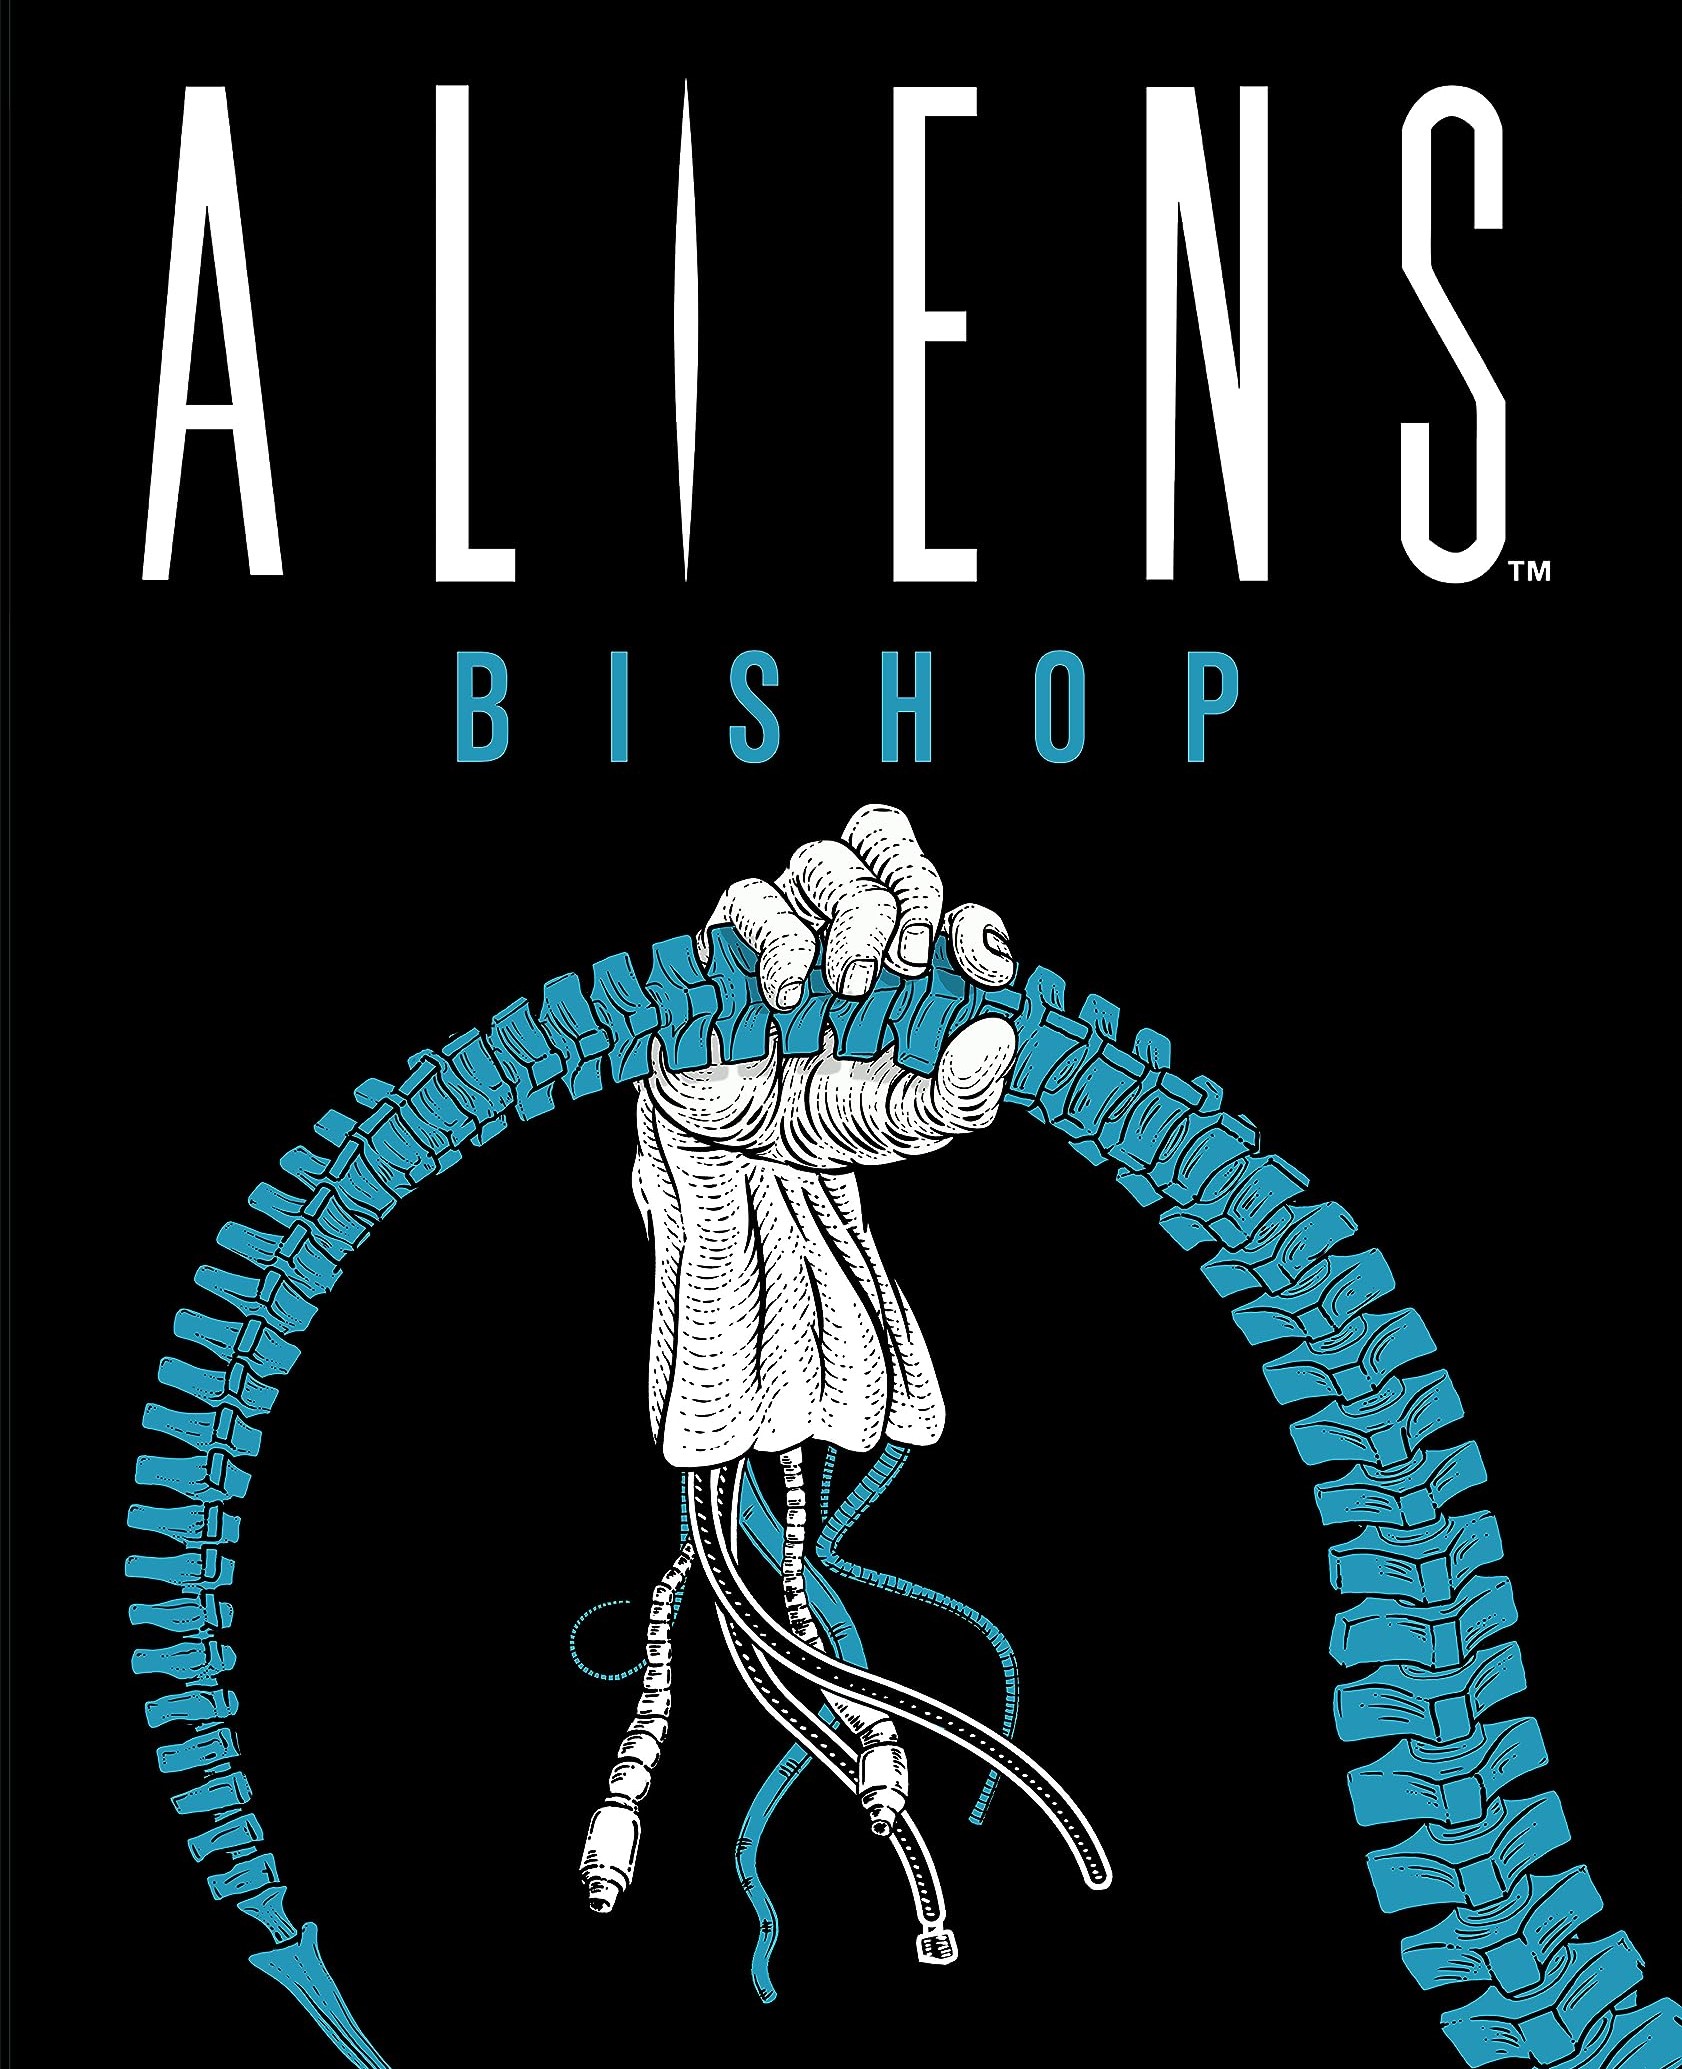 Aliens: Bishop (why I shut up and took the gig)